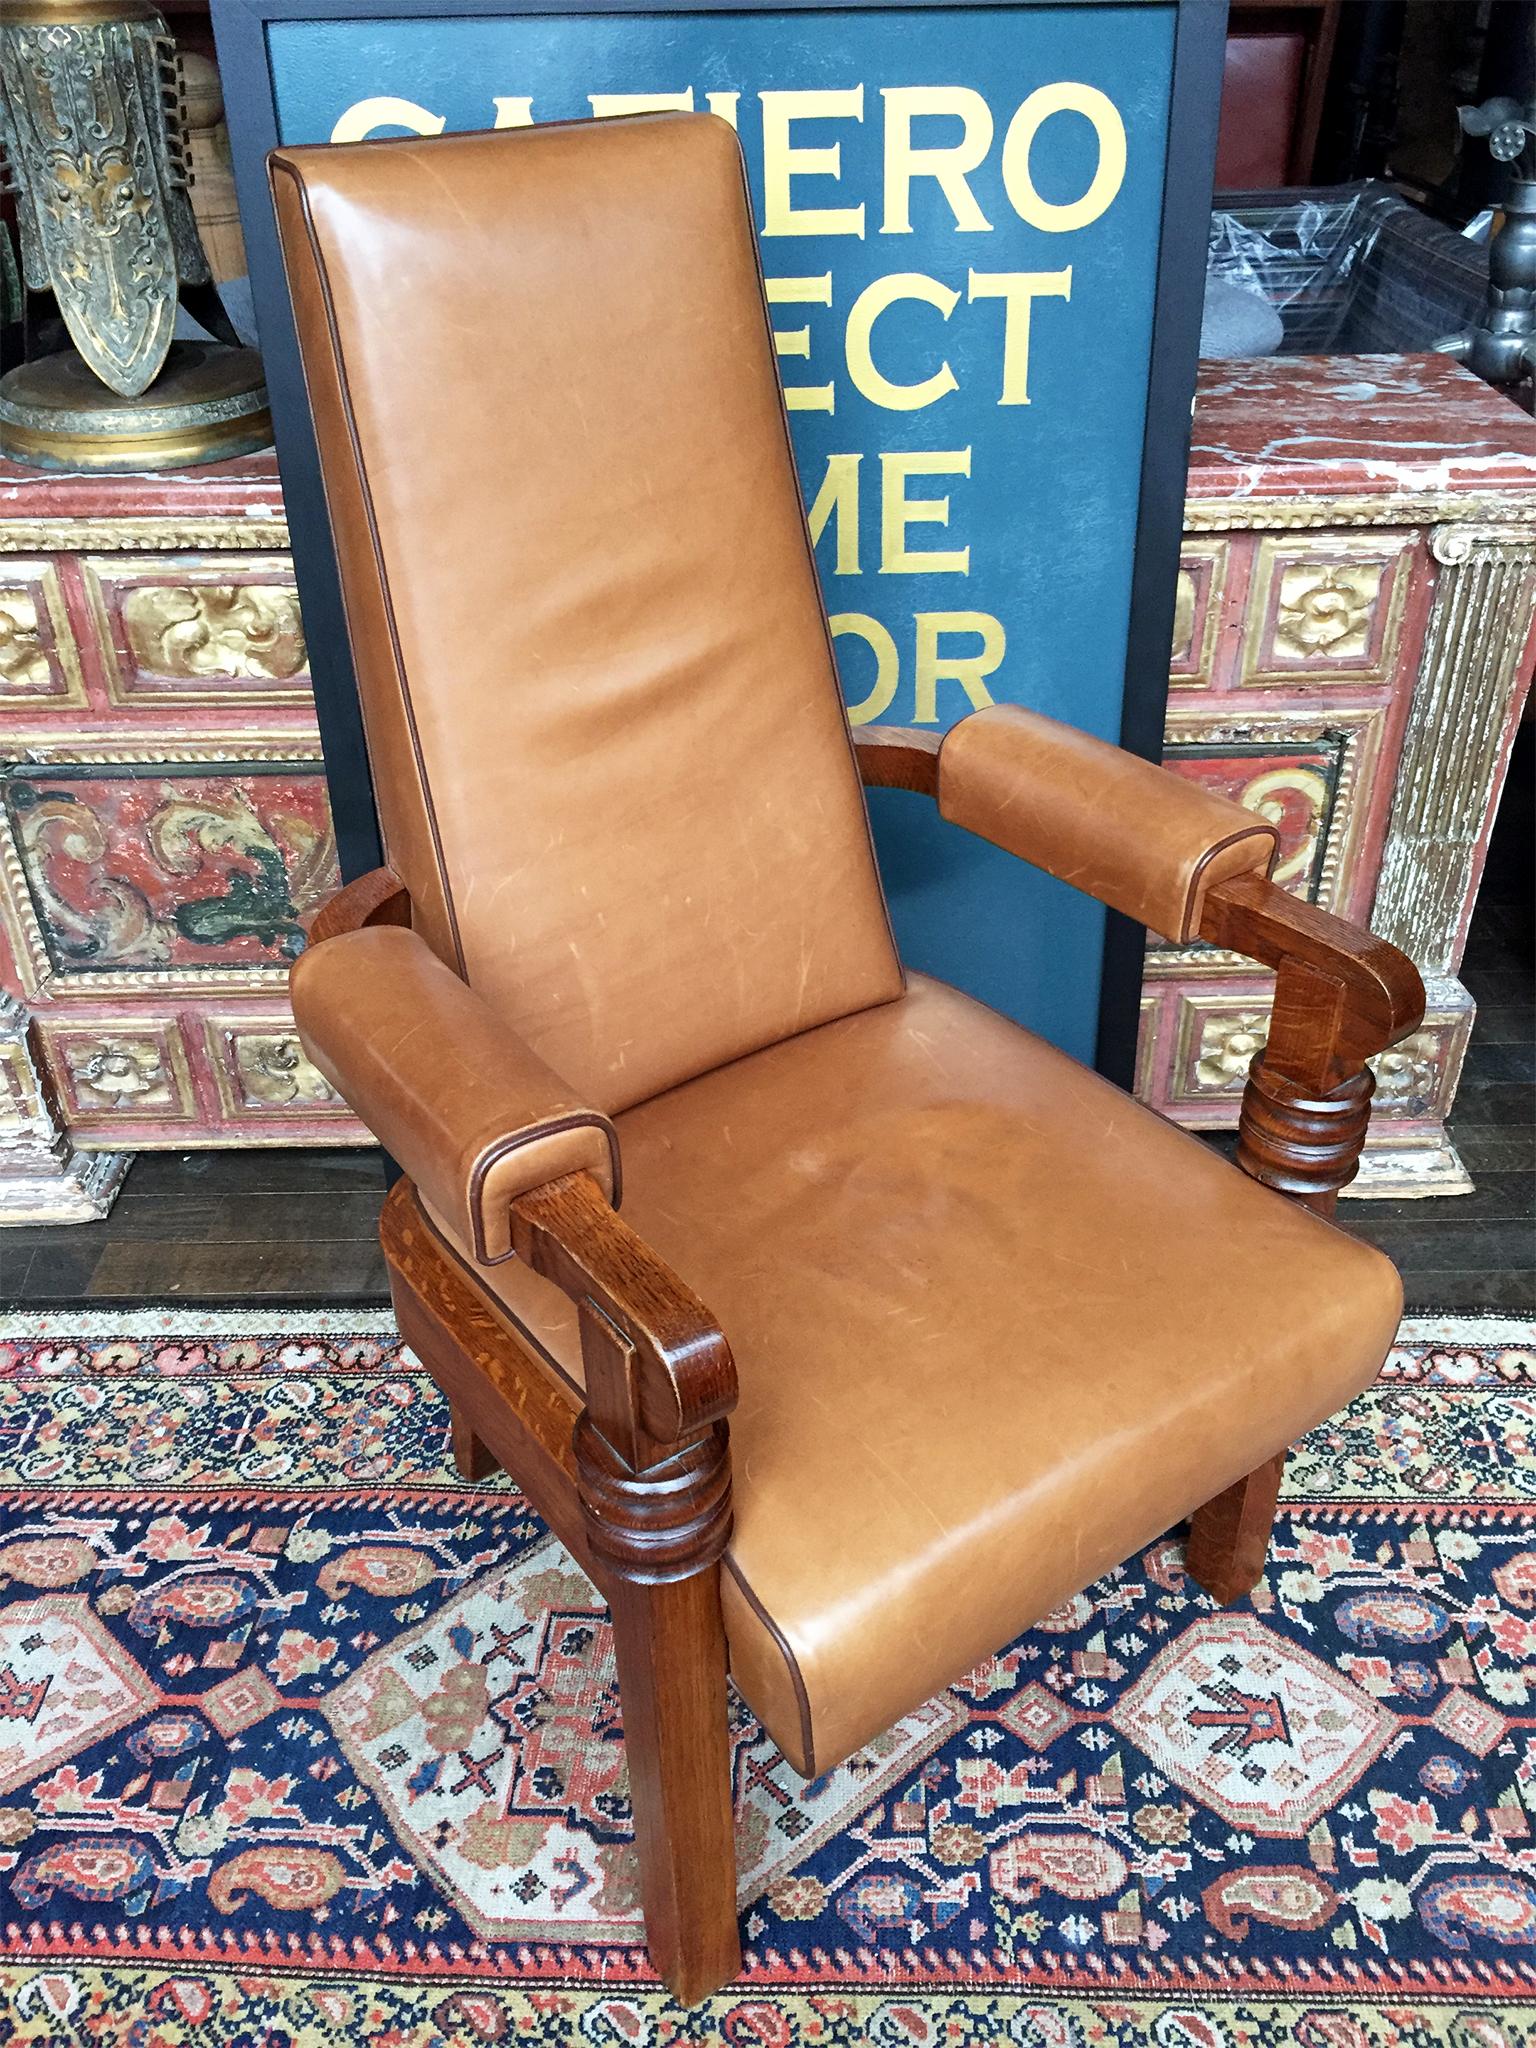 This Art Deco high-back armchair was designed by Charles Dudouyt, circa 1940s. The frame is a solid oak finished in a dark glaze, while the upholstery is a tan leather contoured by piping in a darker leather. While the design is minimalist, there